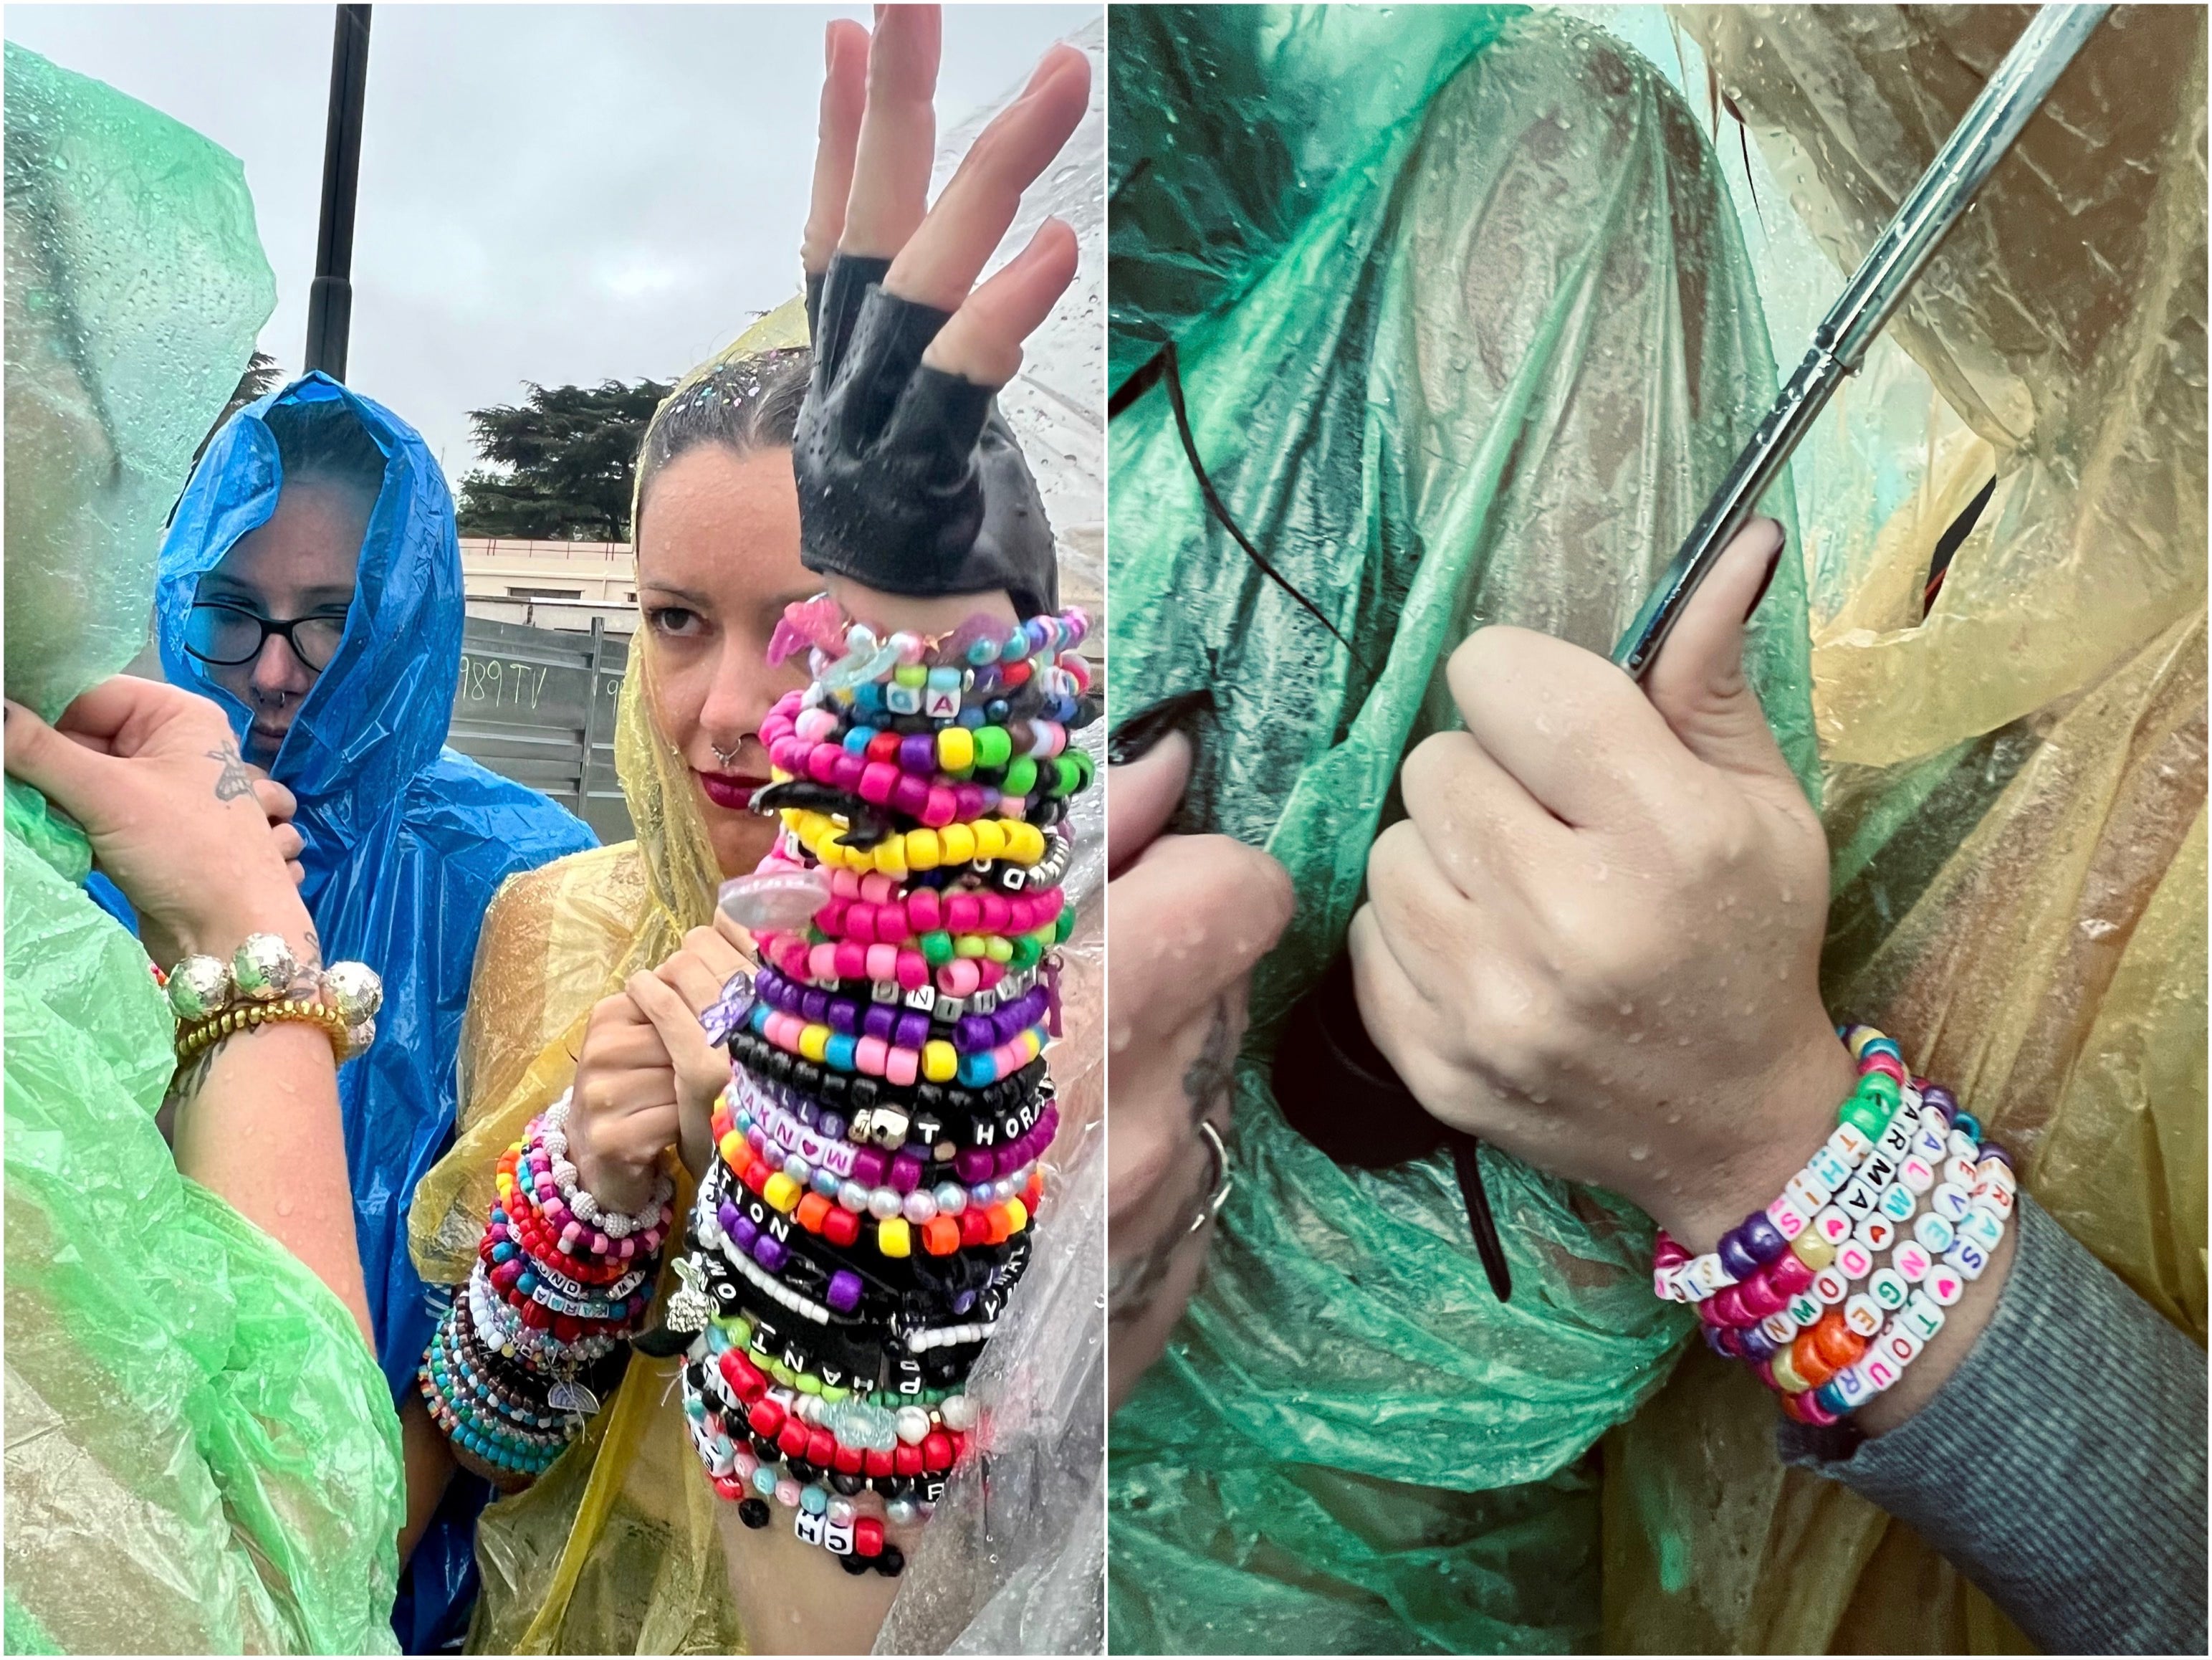 Swifties waiting in line at the cancelled Taylor Swift concert in Buenos Aires wearing the ceremonial friendship bracelets exchanged by fans at shows